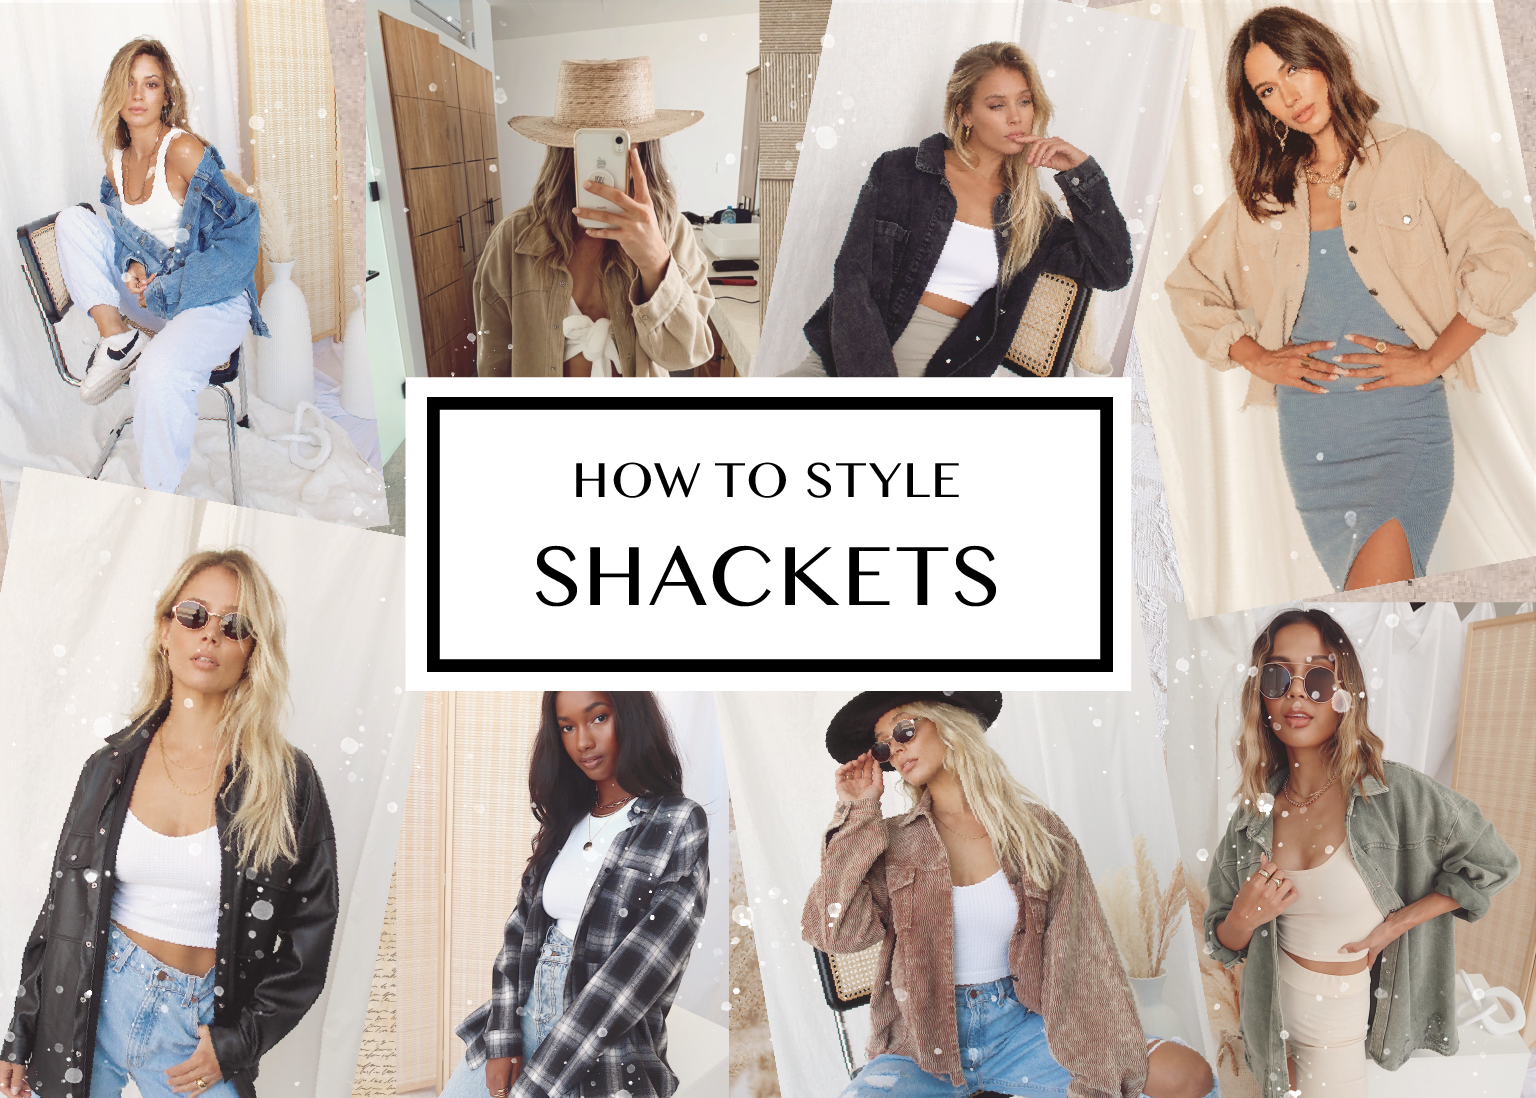 How to Style Shackets